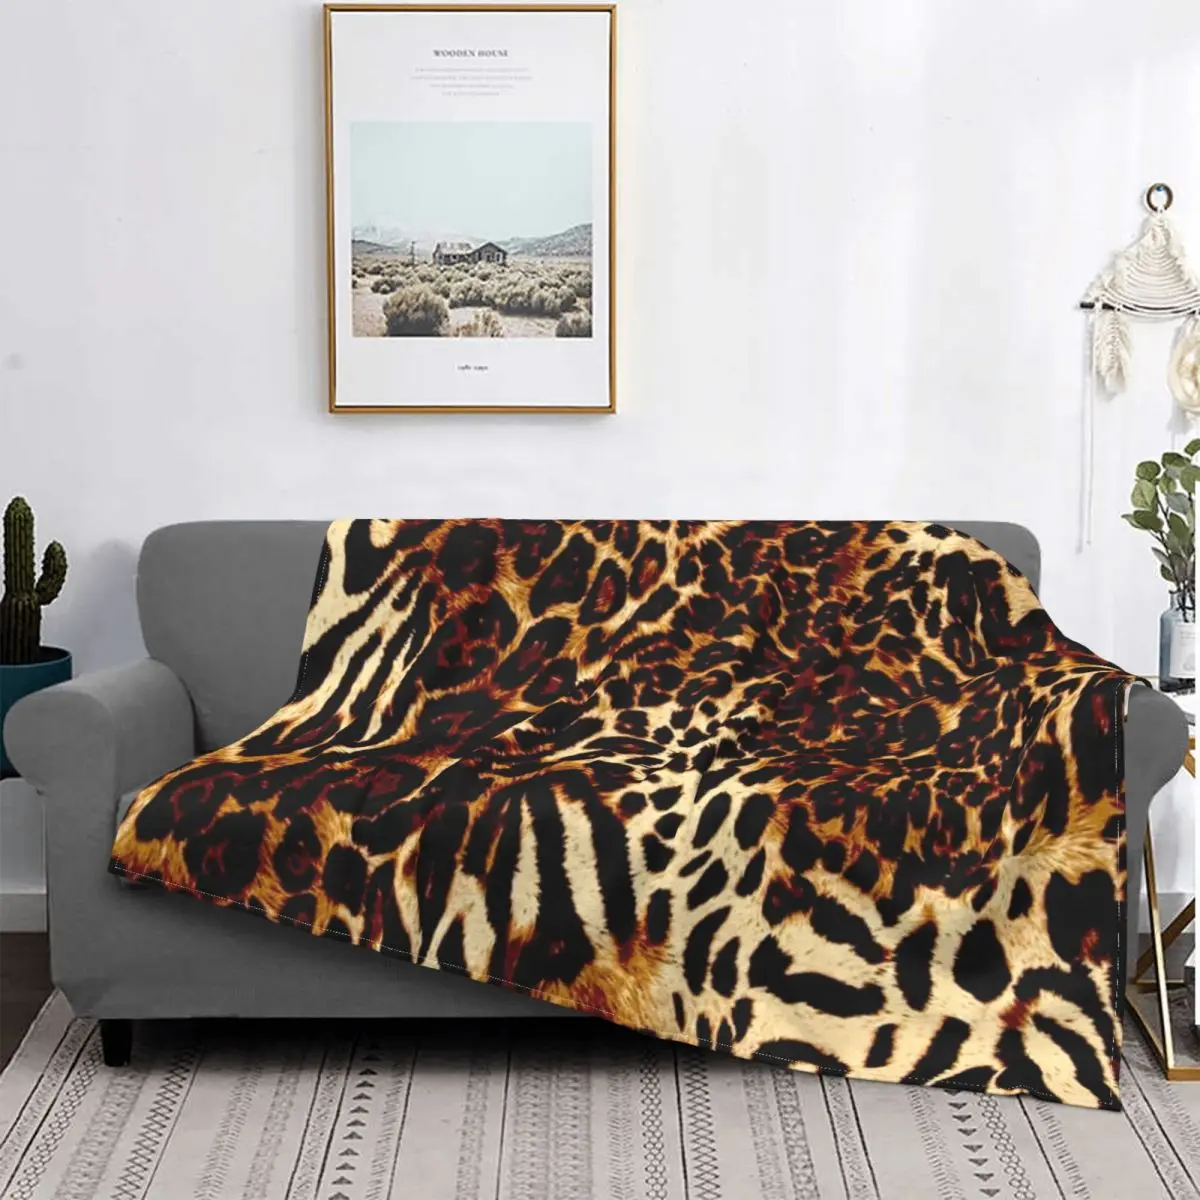 

Leopard Fine Cheetah Flannel Blankets, All Season Abstract Portable Lightweight Throw Blankets for Home Office Bedding Throws